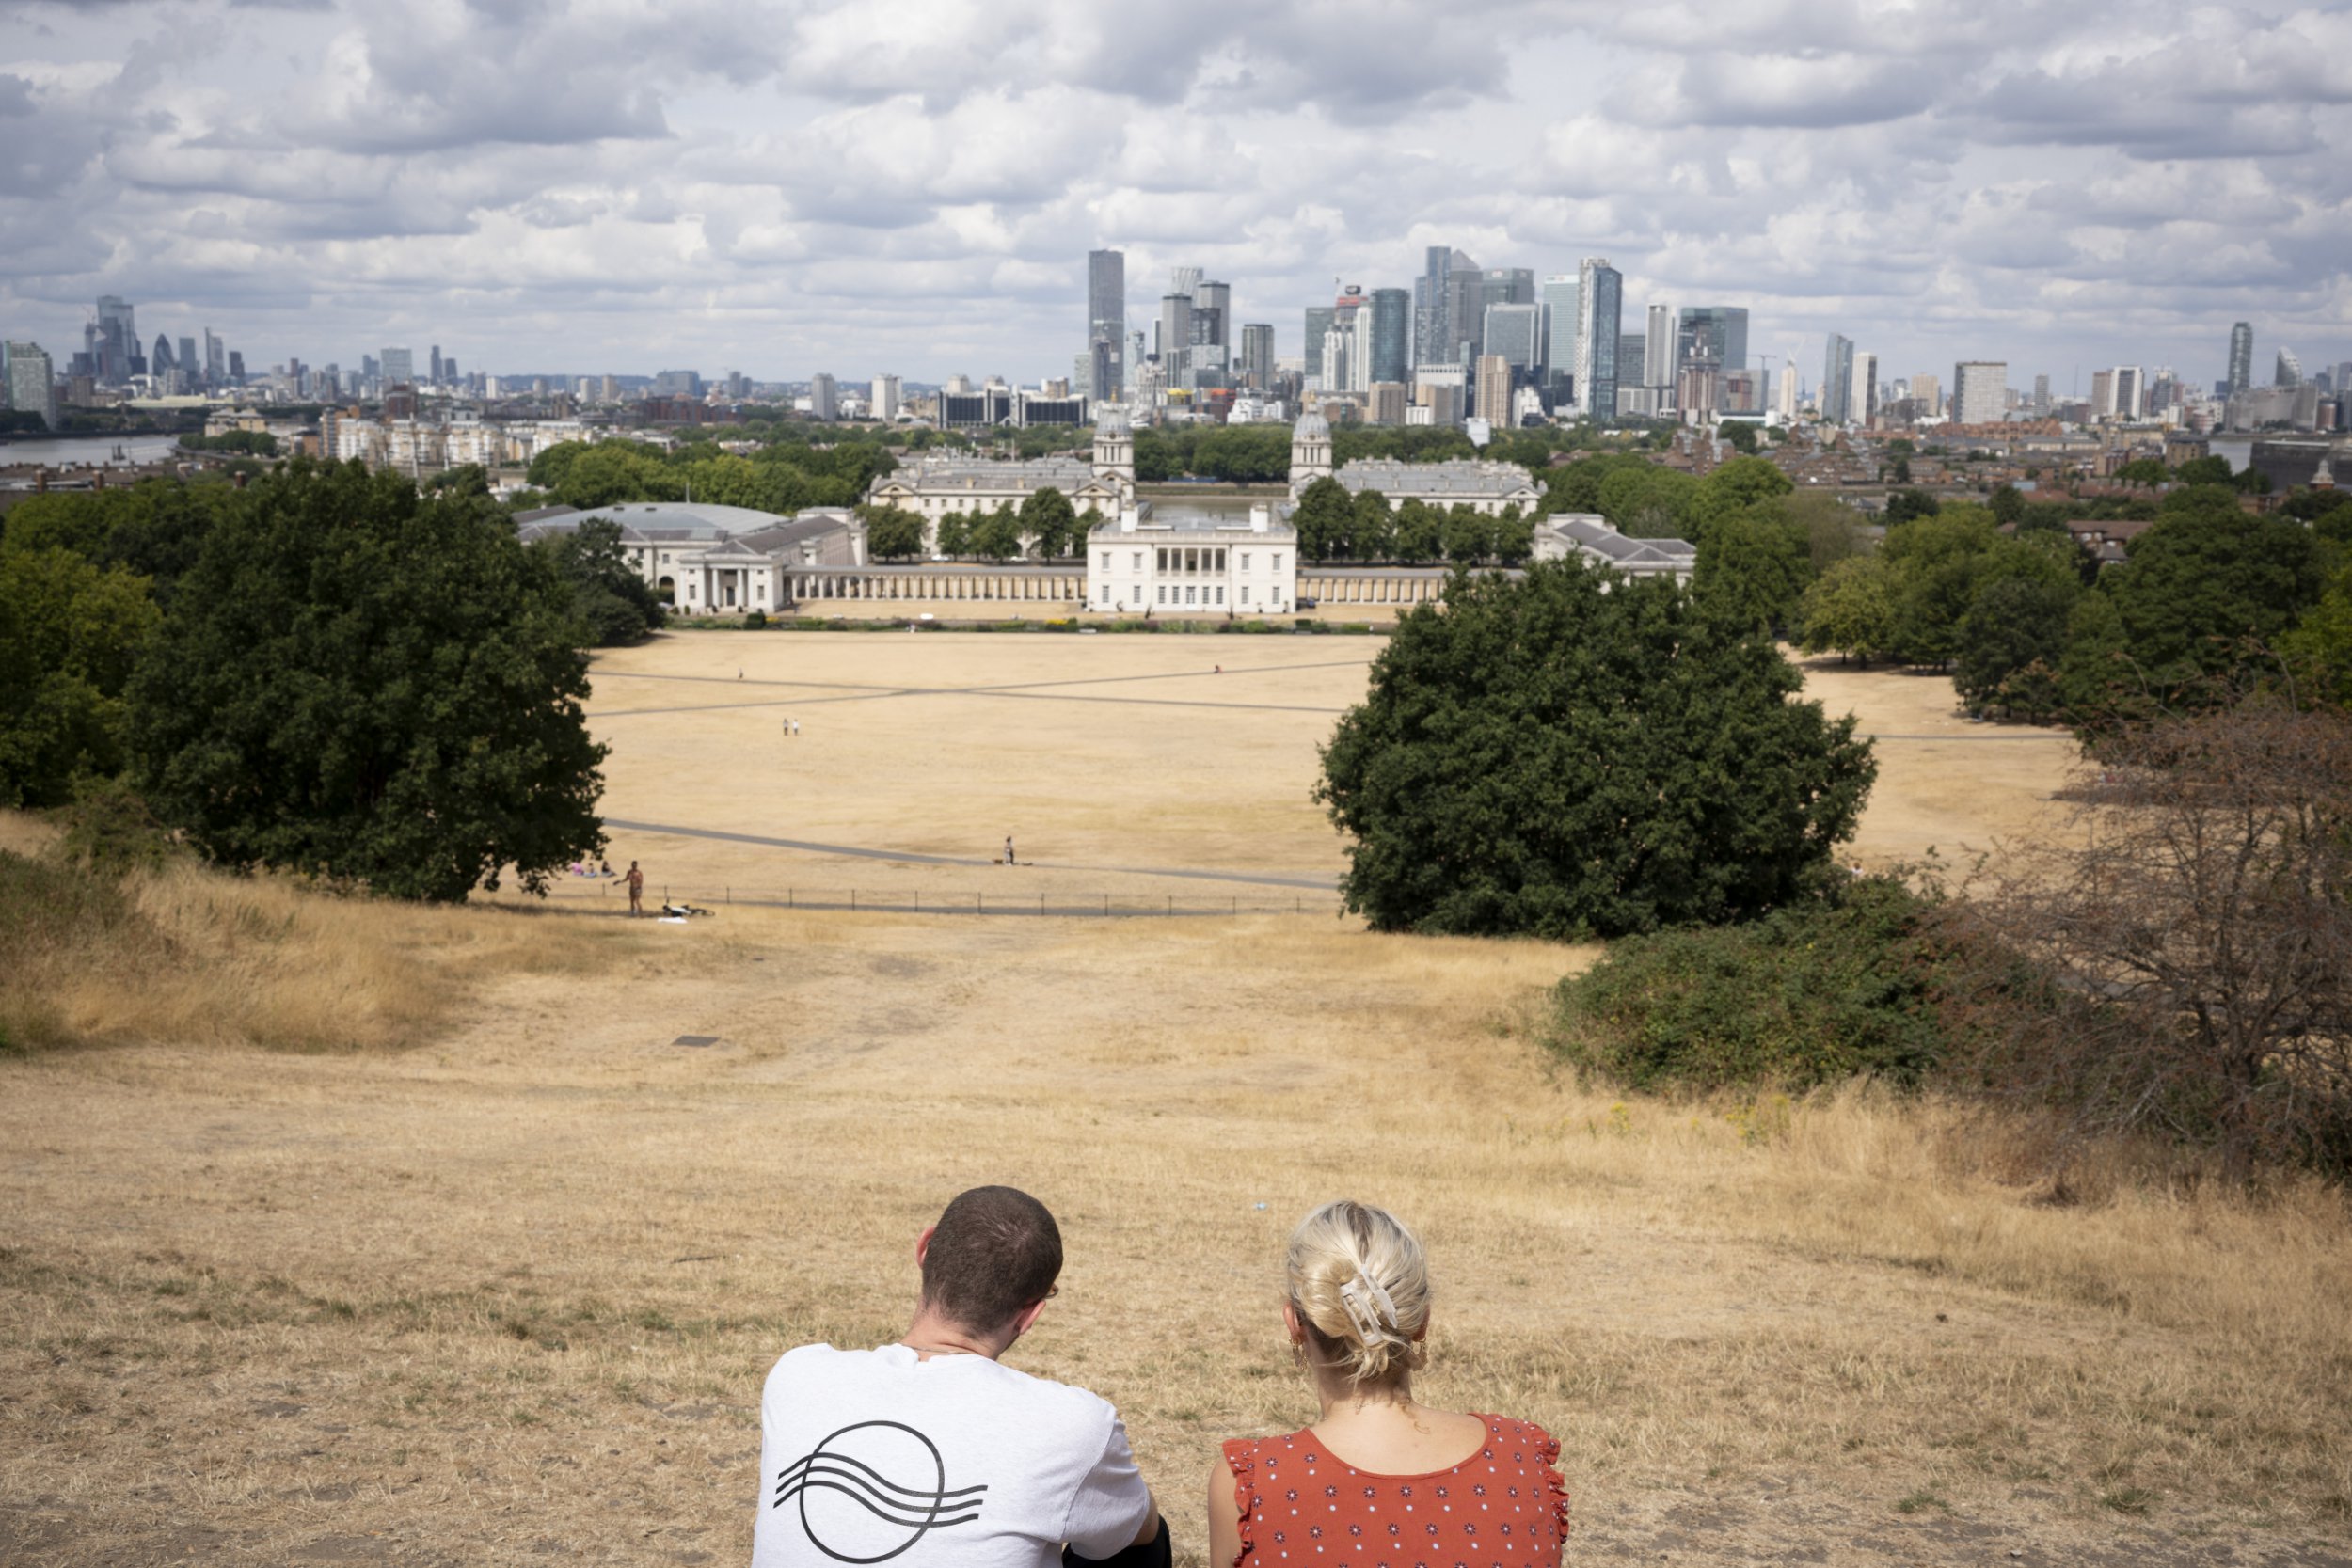 Greenwich Park as the UK's heatwave and drought saw little rain (Photo by Richard Baker/ In Pictures via Getty Images)